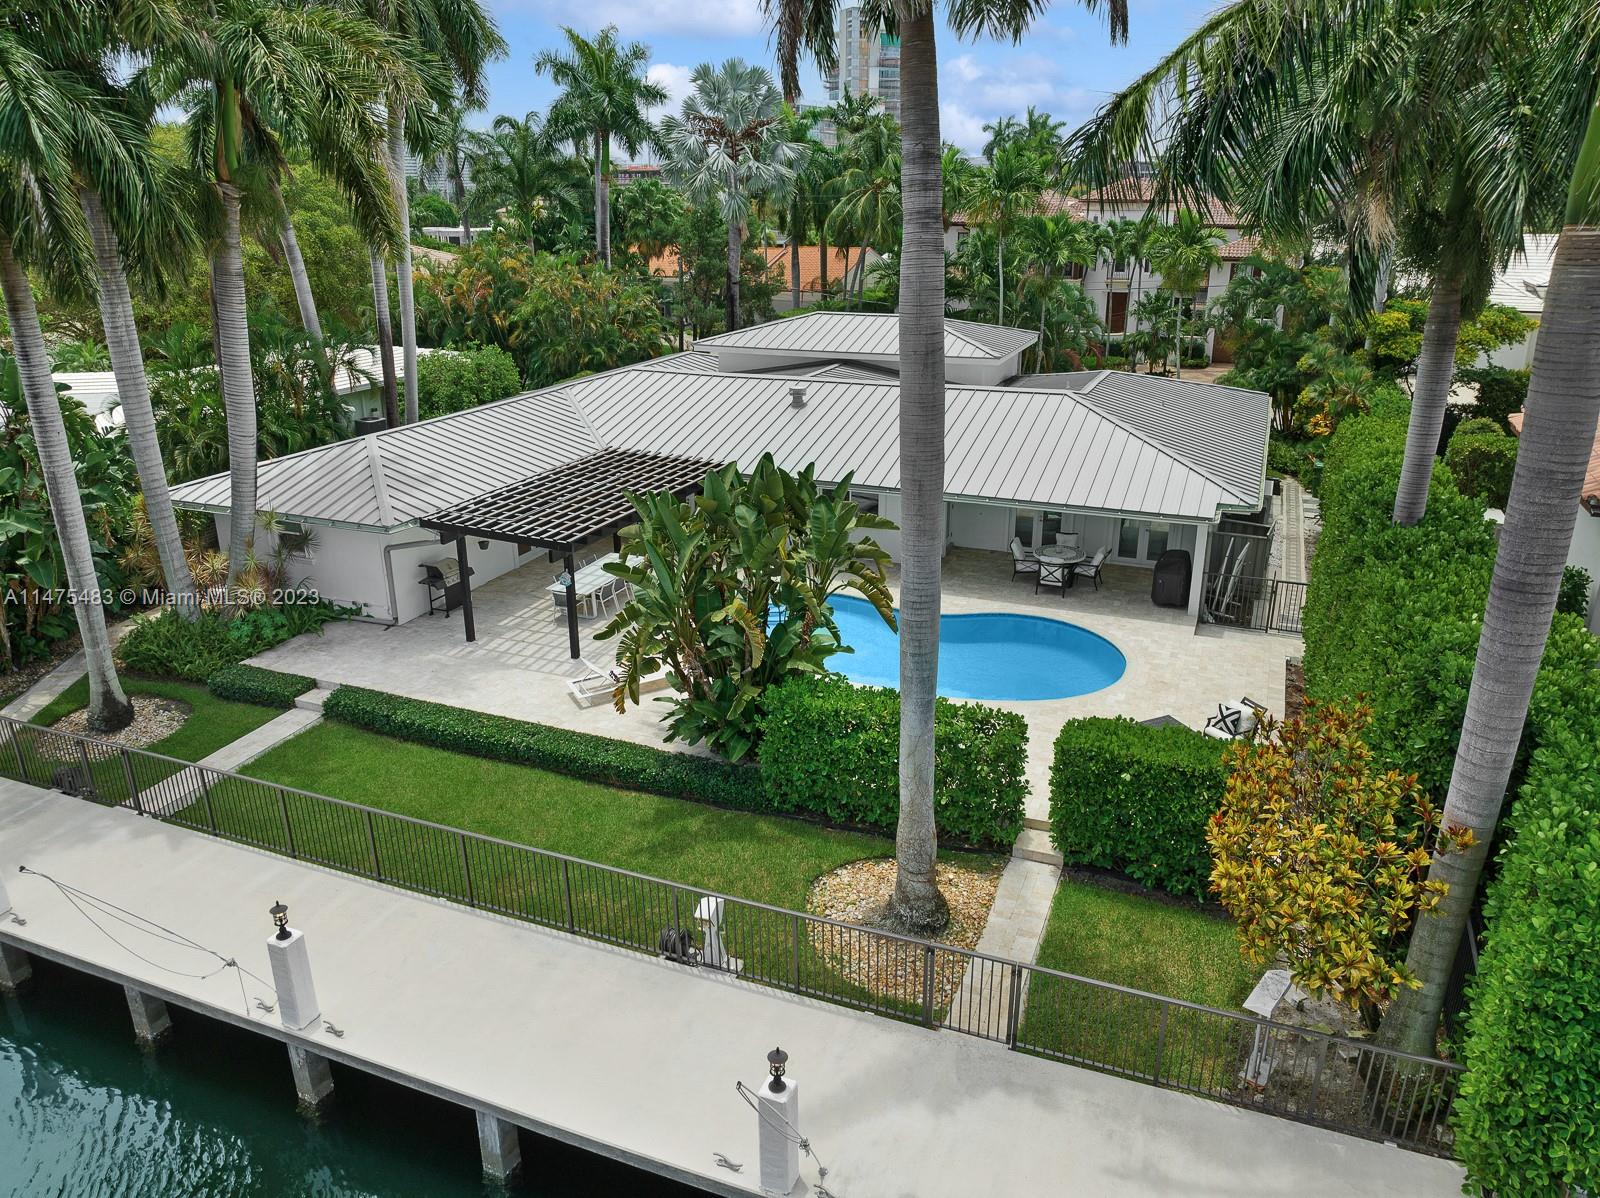 2537 Lucille Dr, Fort Lauderdale, Broward County, Florida - 4 Bedrooms  
4 Bathrooms - 